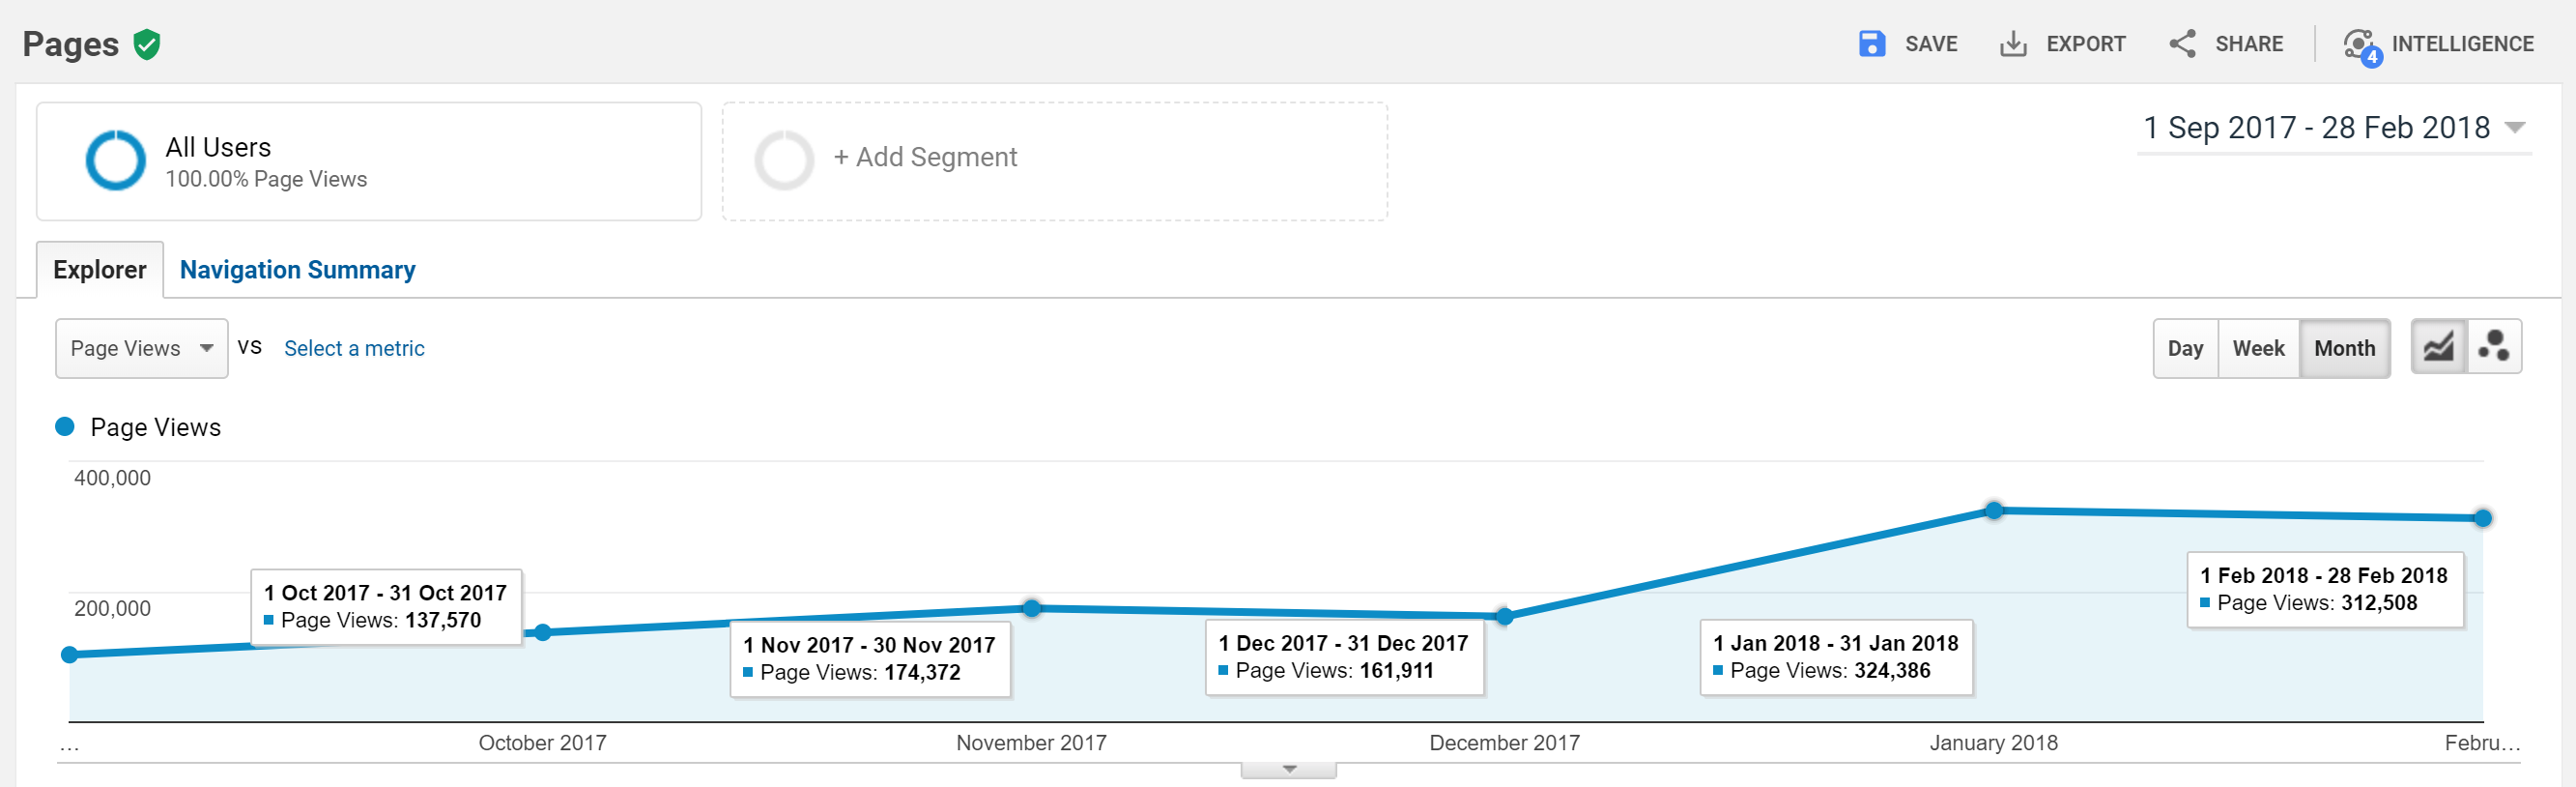 How We Doubled Our Blog Views to 300,000/Month in One Month